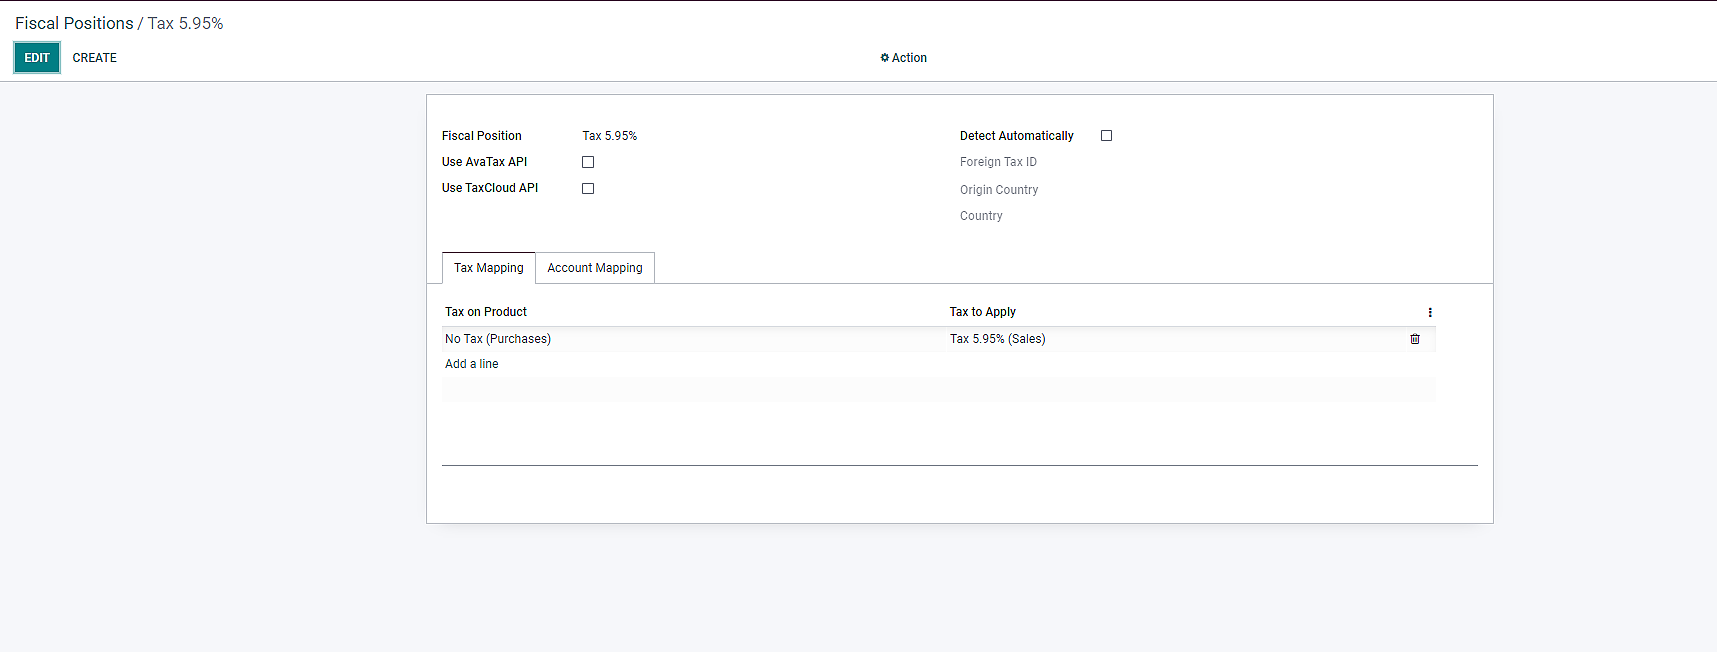 chart of accounts odoo click on “Create” once done.